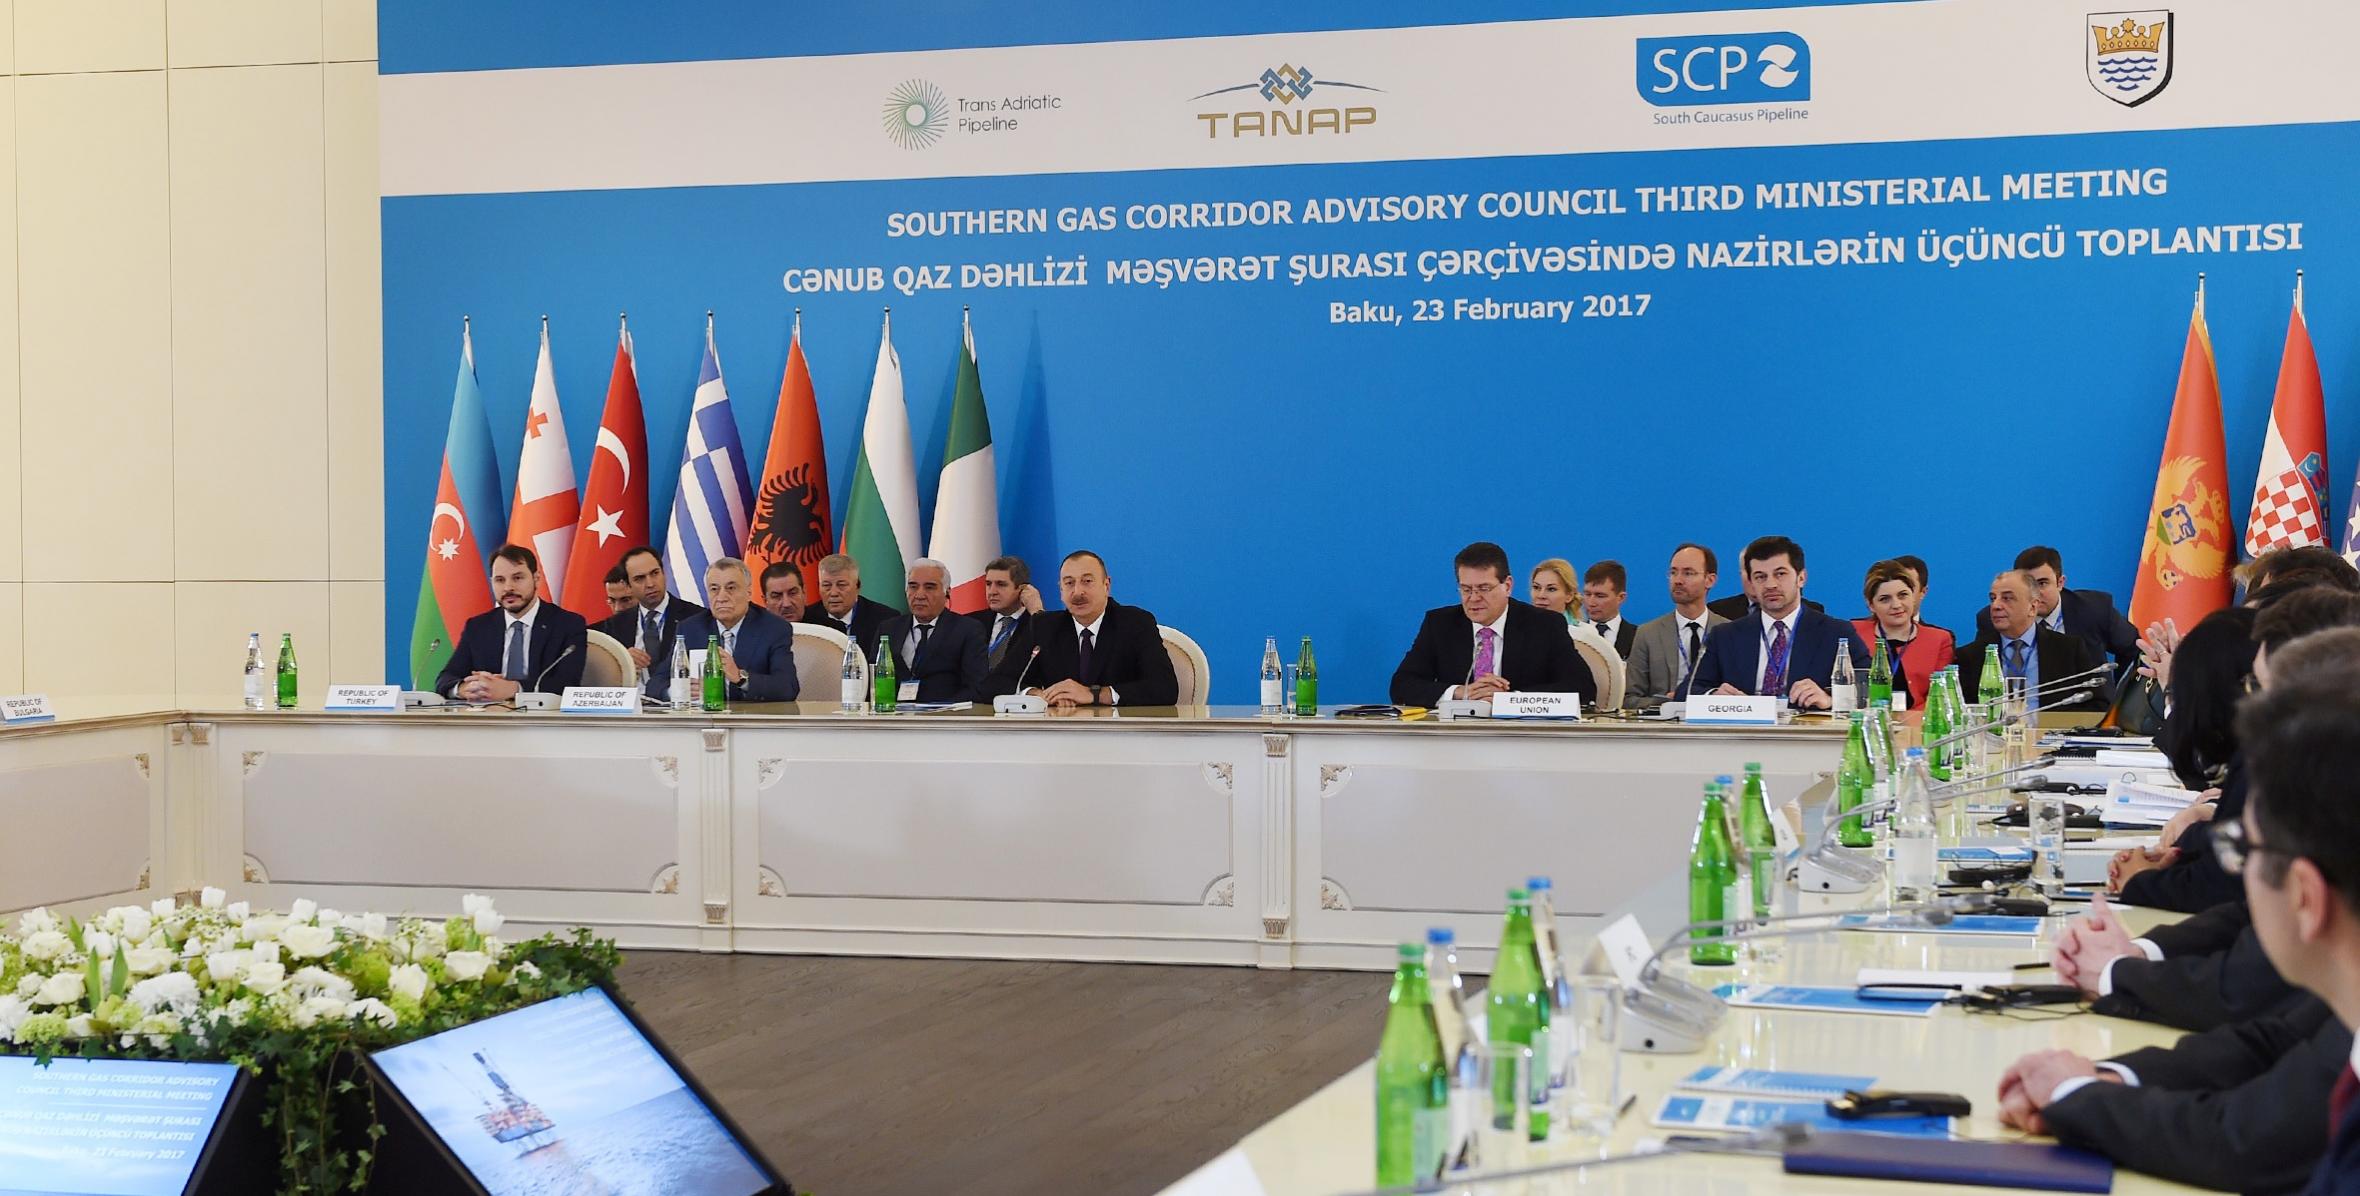 Third Ministerial Meeting of Southern Gas Corridor Advisory Council kicked off in Baku